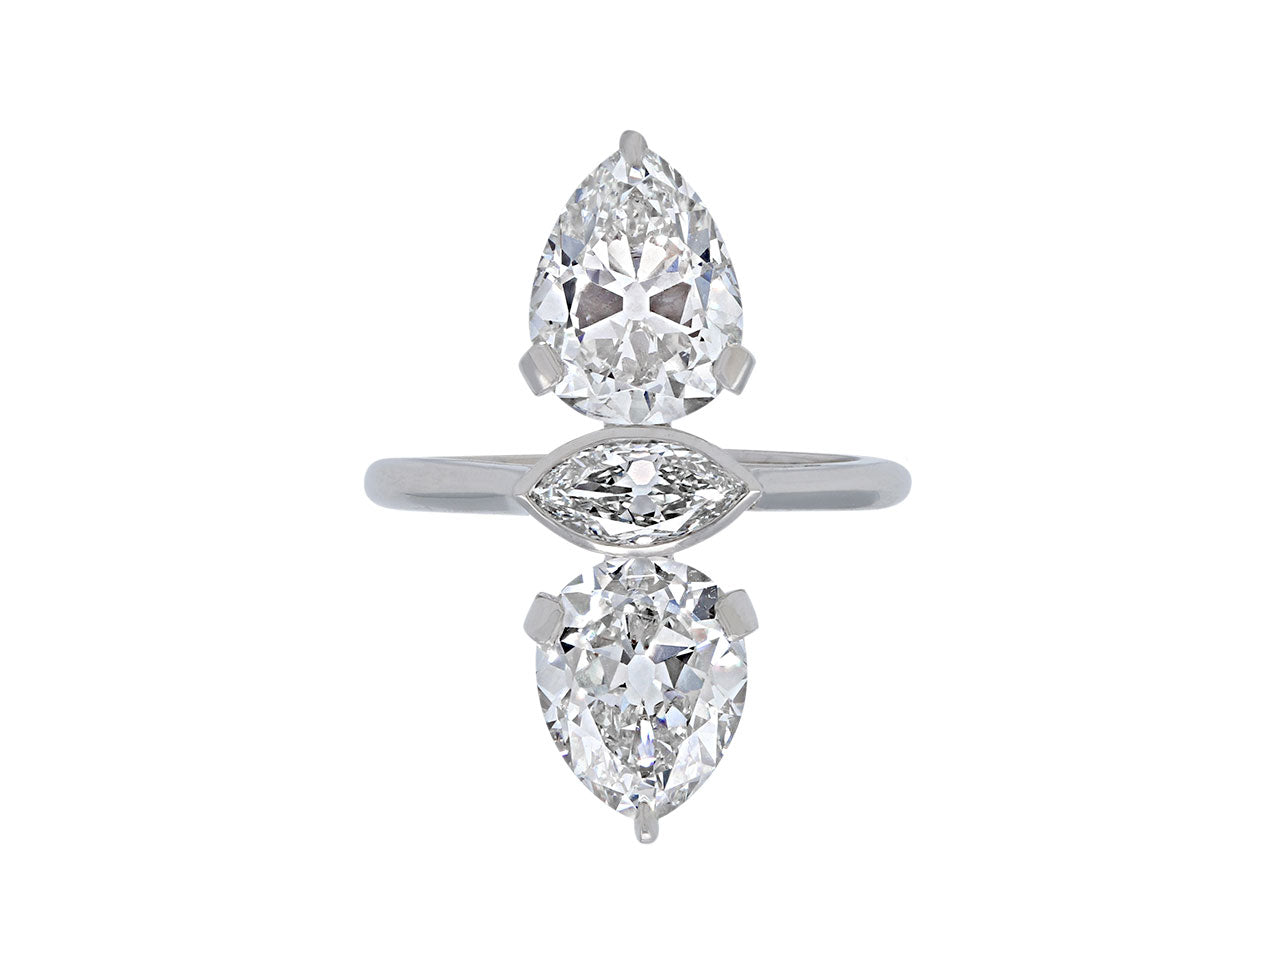 Beladora 'Bespoke' Twin Old-cut Pear and Marquise Diamond Ring in Platinum